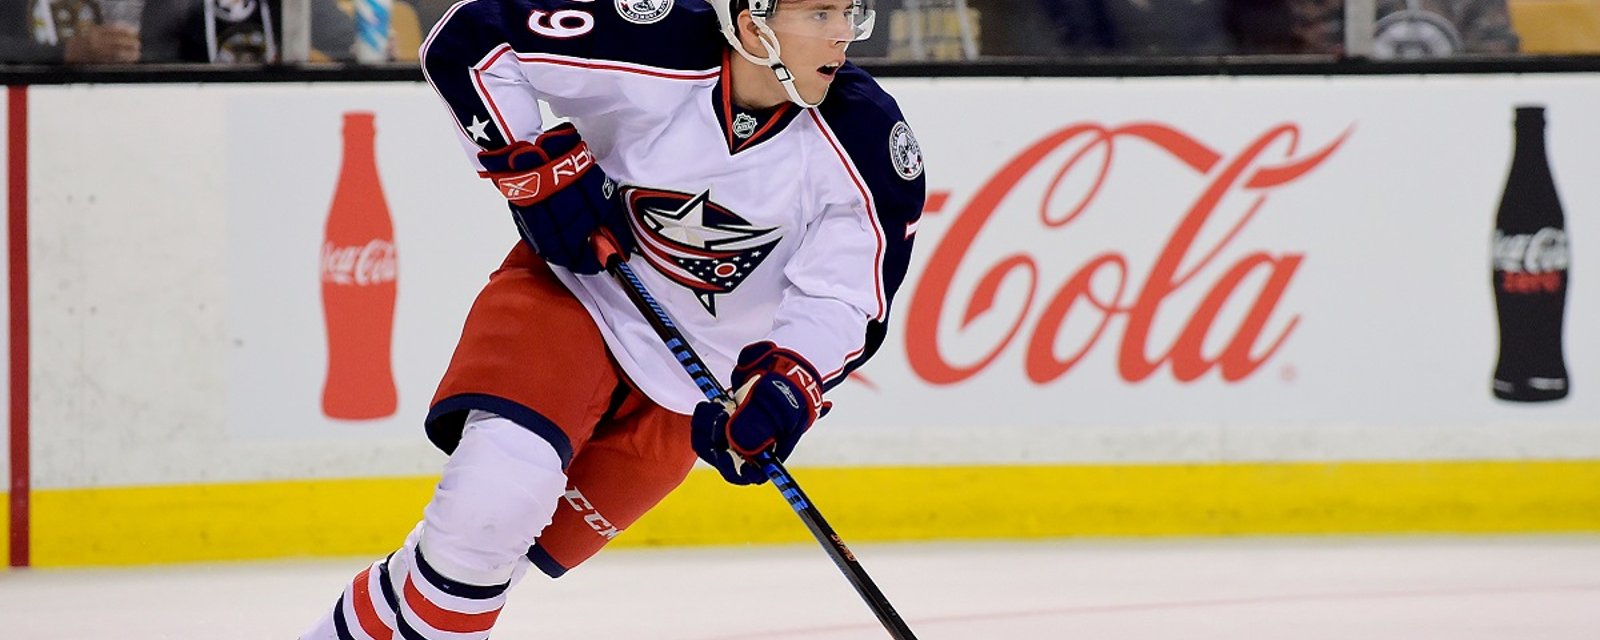 Report: Red hot Blue Jackets sign young Russian forward to NHL contract.